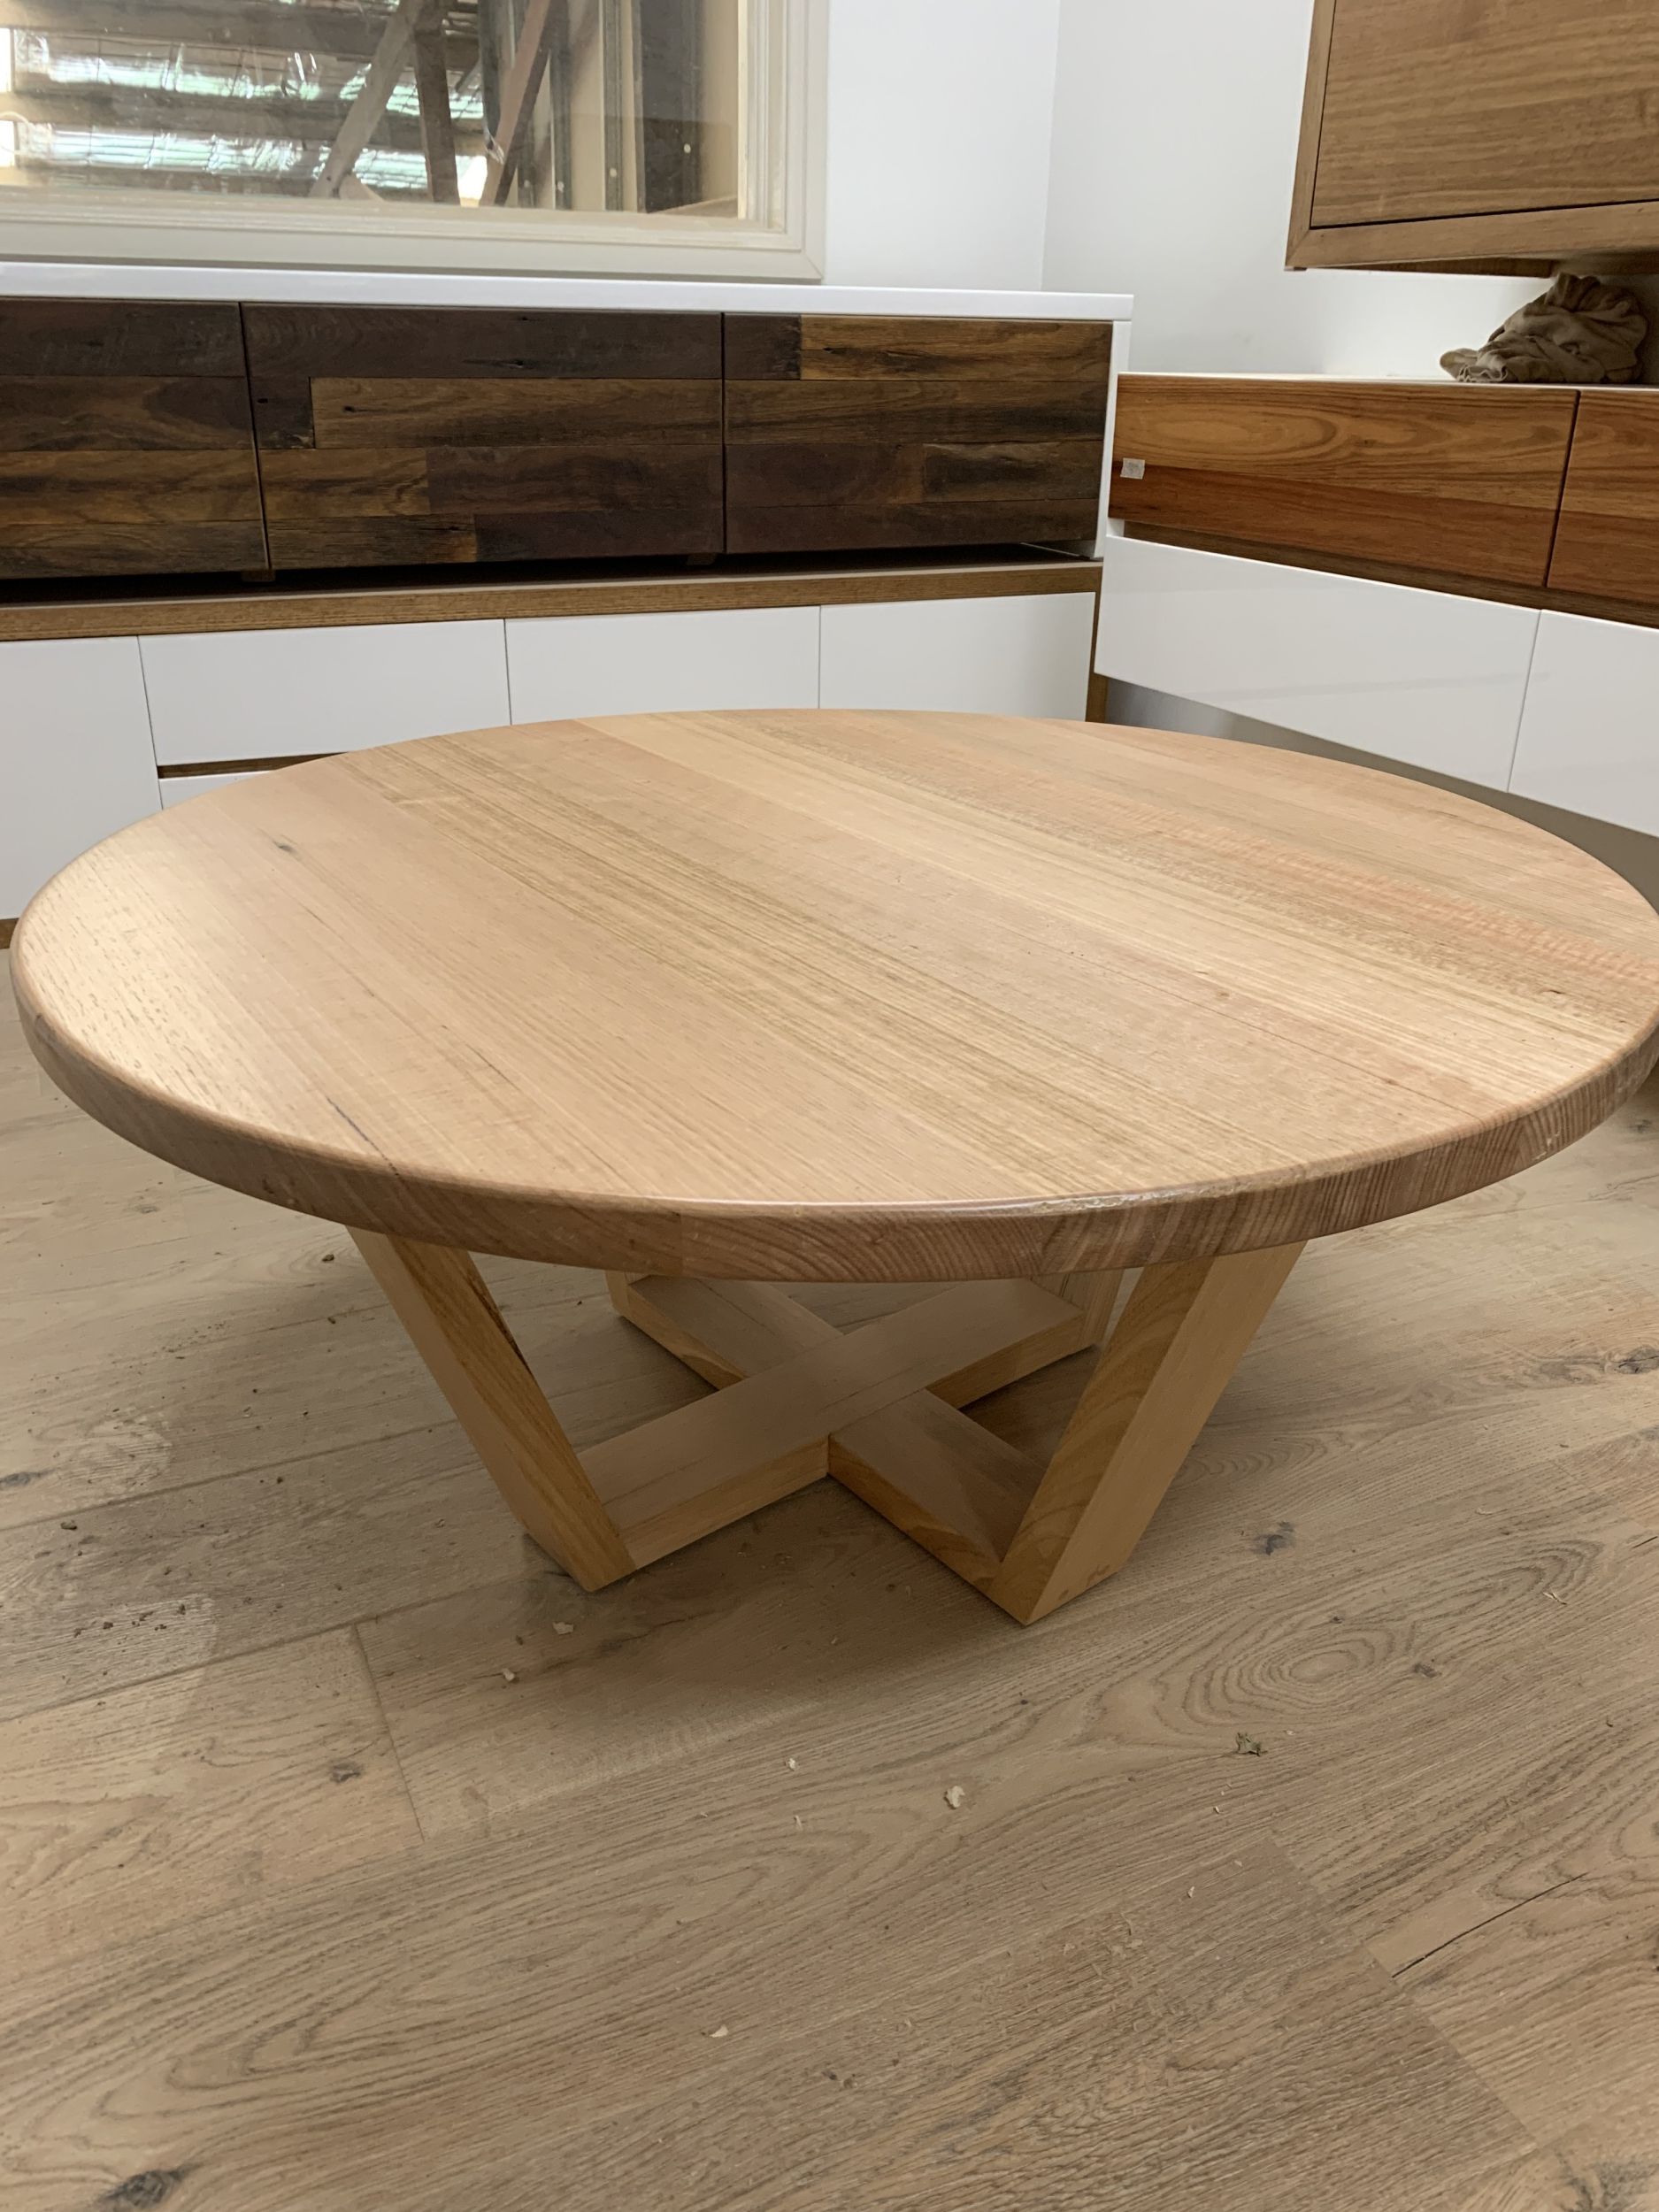 Newest Metal Legs And Oak Top Round Coffee Tables Intended For Tassie Oak Cross Round Coffee Table – Australian Made (View 4 of 20)